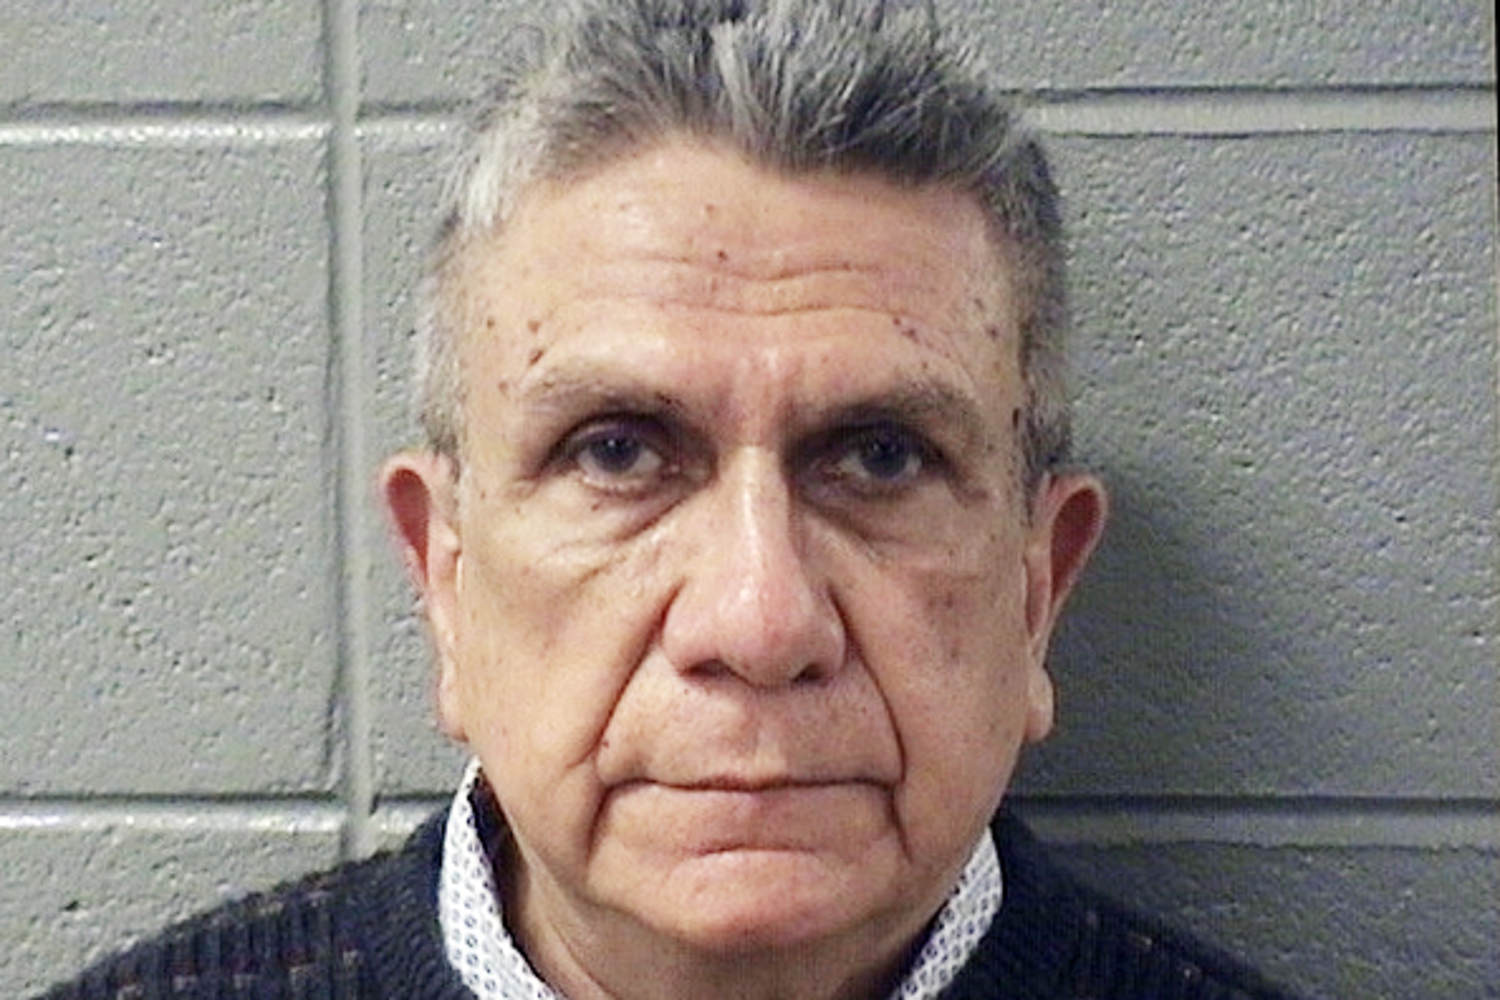 Lawsuit accuses Chicago doctor of abusing more than 300 women over decades